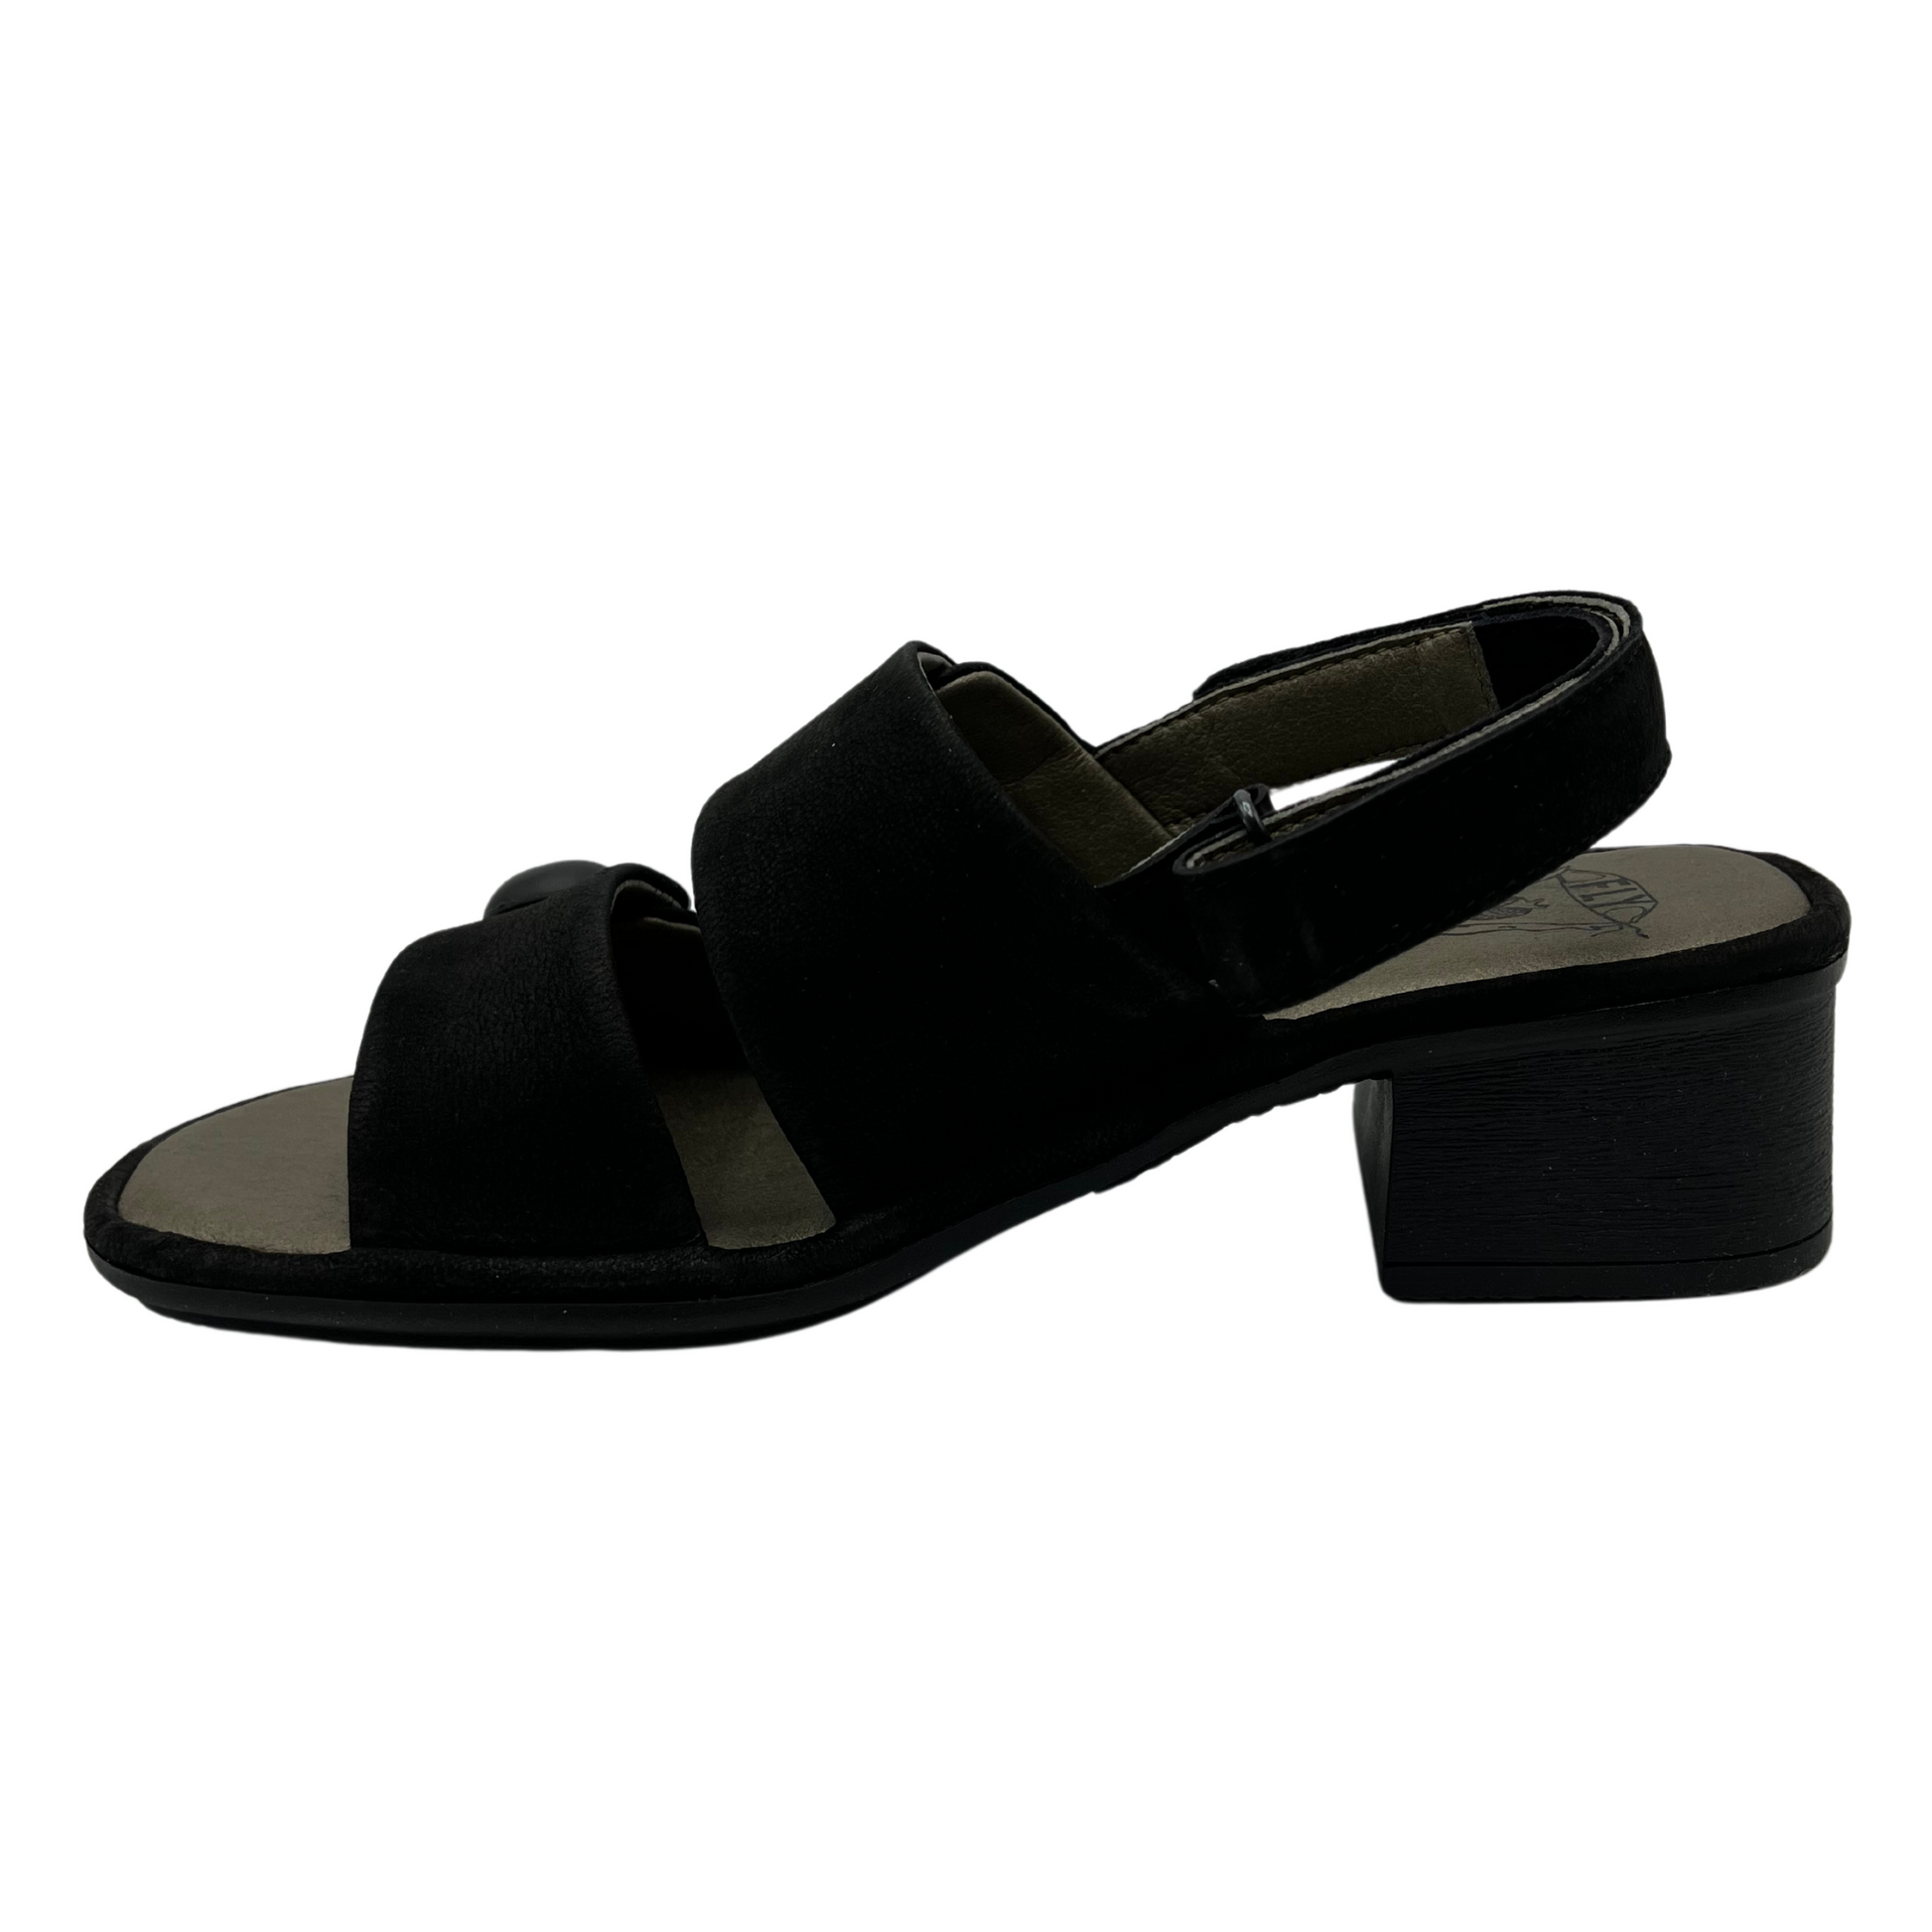 Left facing view of black leather sandal with block heel, velcro slingback strap and double straps with large buttons